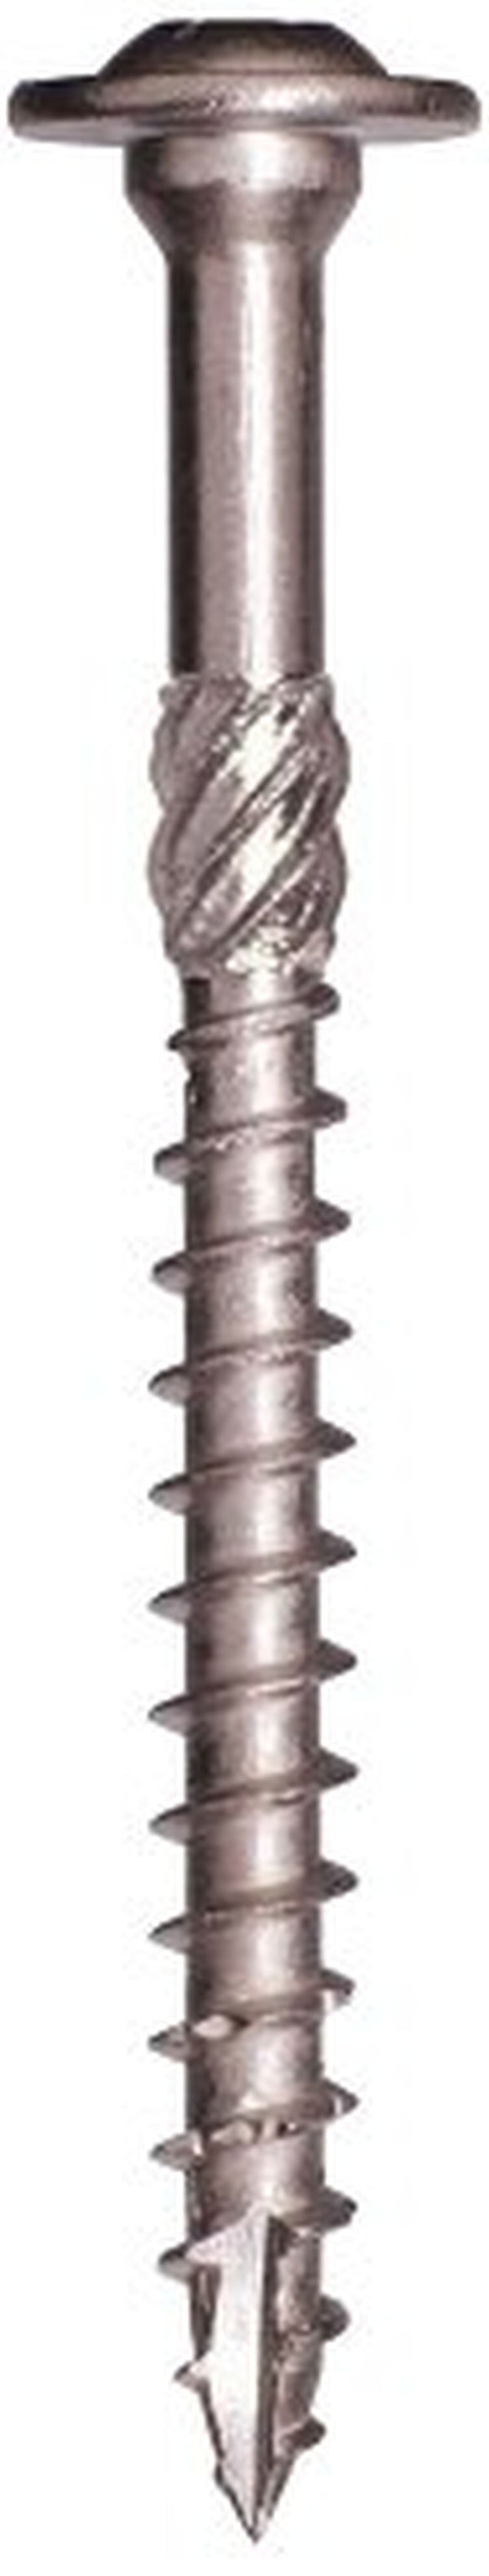 GRK Screws 30225 5/16x4 Star Drive Washer Head 305 Stainless Steel RSS Rugged Structural Screws, 400/Box